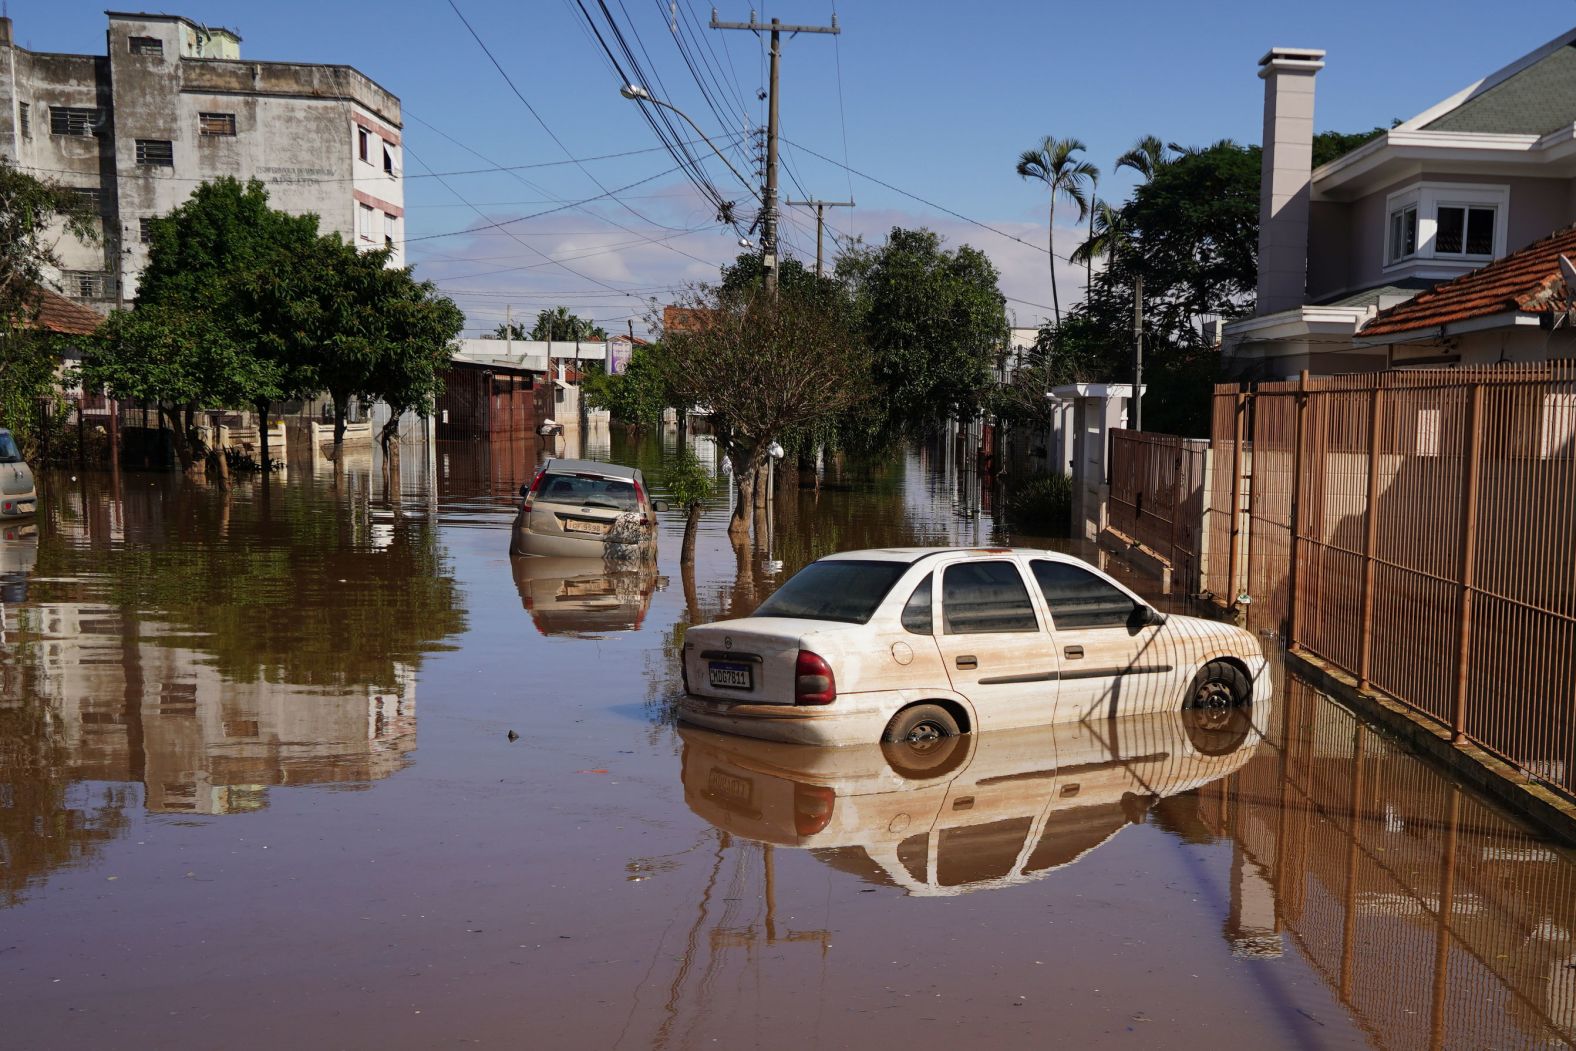 Cars are surrounded by flooded streets after heavy rain in Canoas, Brazil, on Thursday, May 9. Dozens of people have died in the <a href="index.php?page=&url=https%3A%2F%2Fwww.cnn.com%2F2024%2F05%2F09%2Fworld%2Fbrazil-floods-death-toll-intl-latam%2Findex.html" target="_blank">heavy rains and floods</a> that have torn through the state of Rio Grande do Sul.